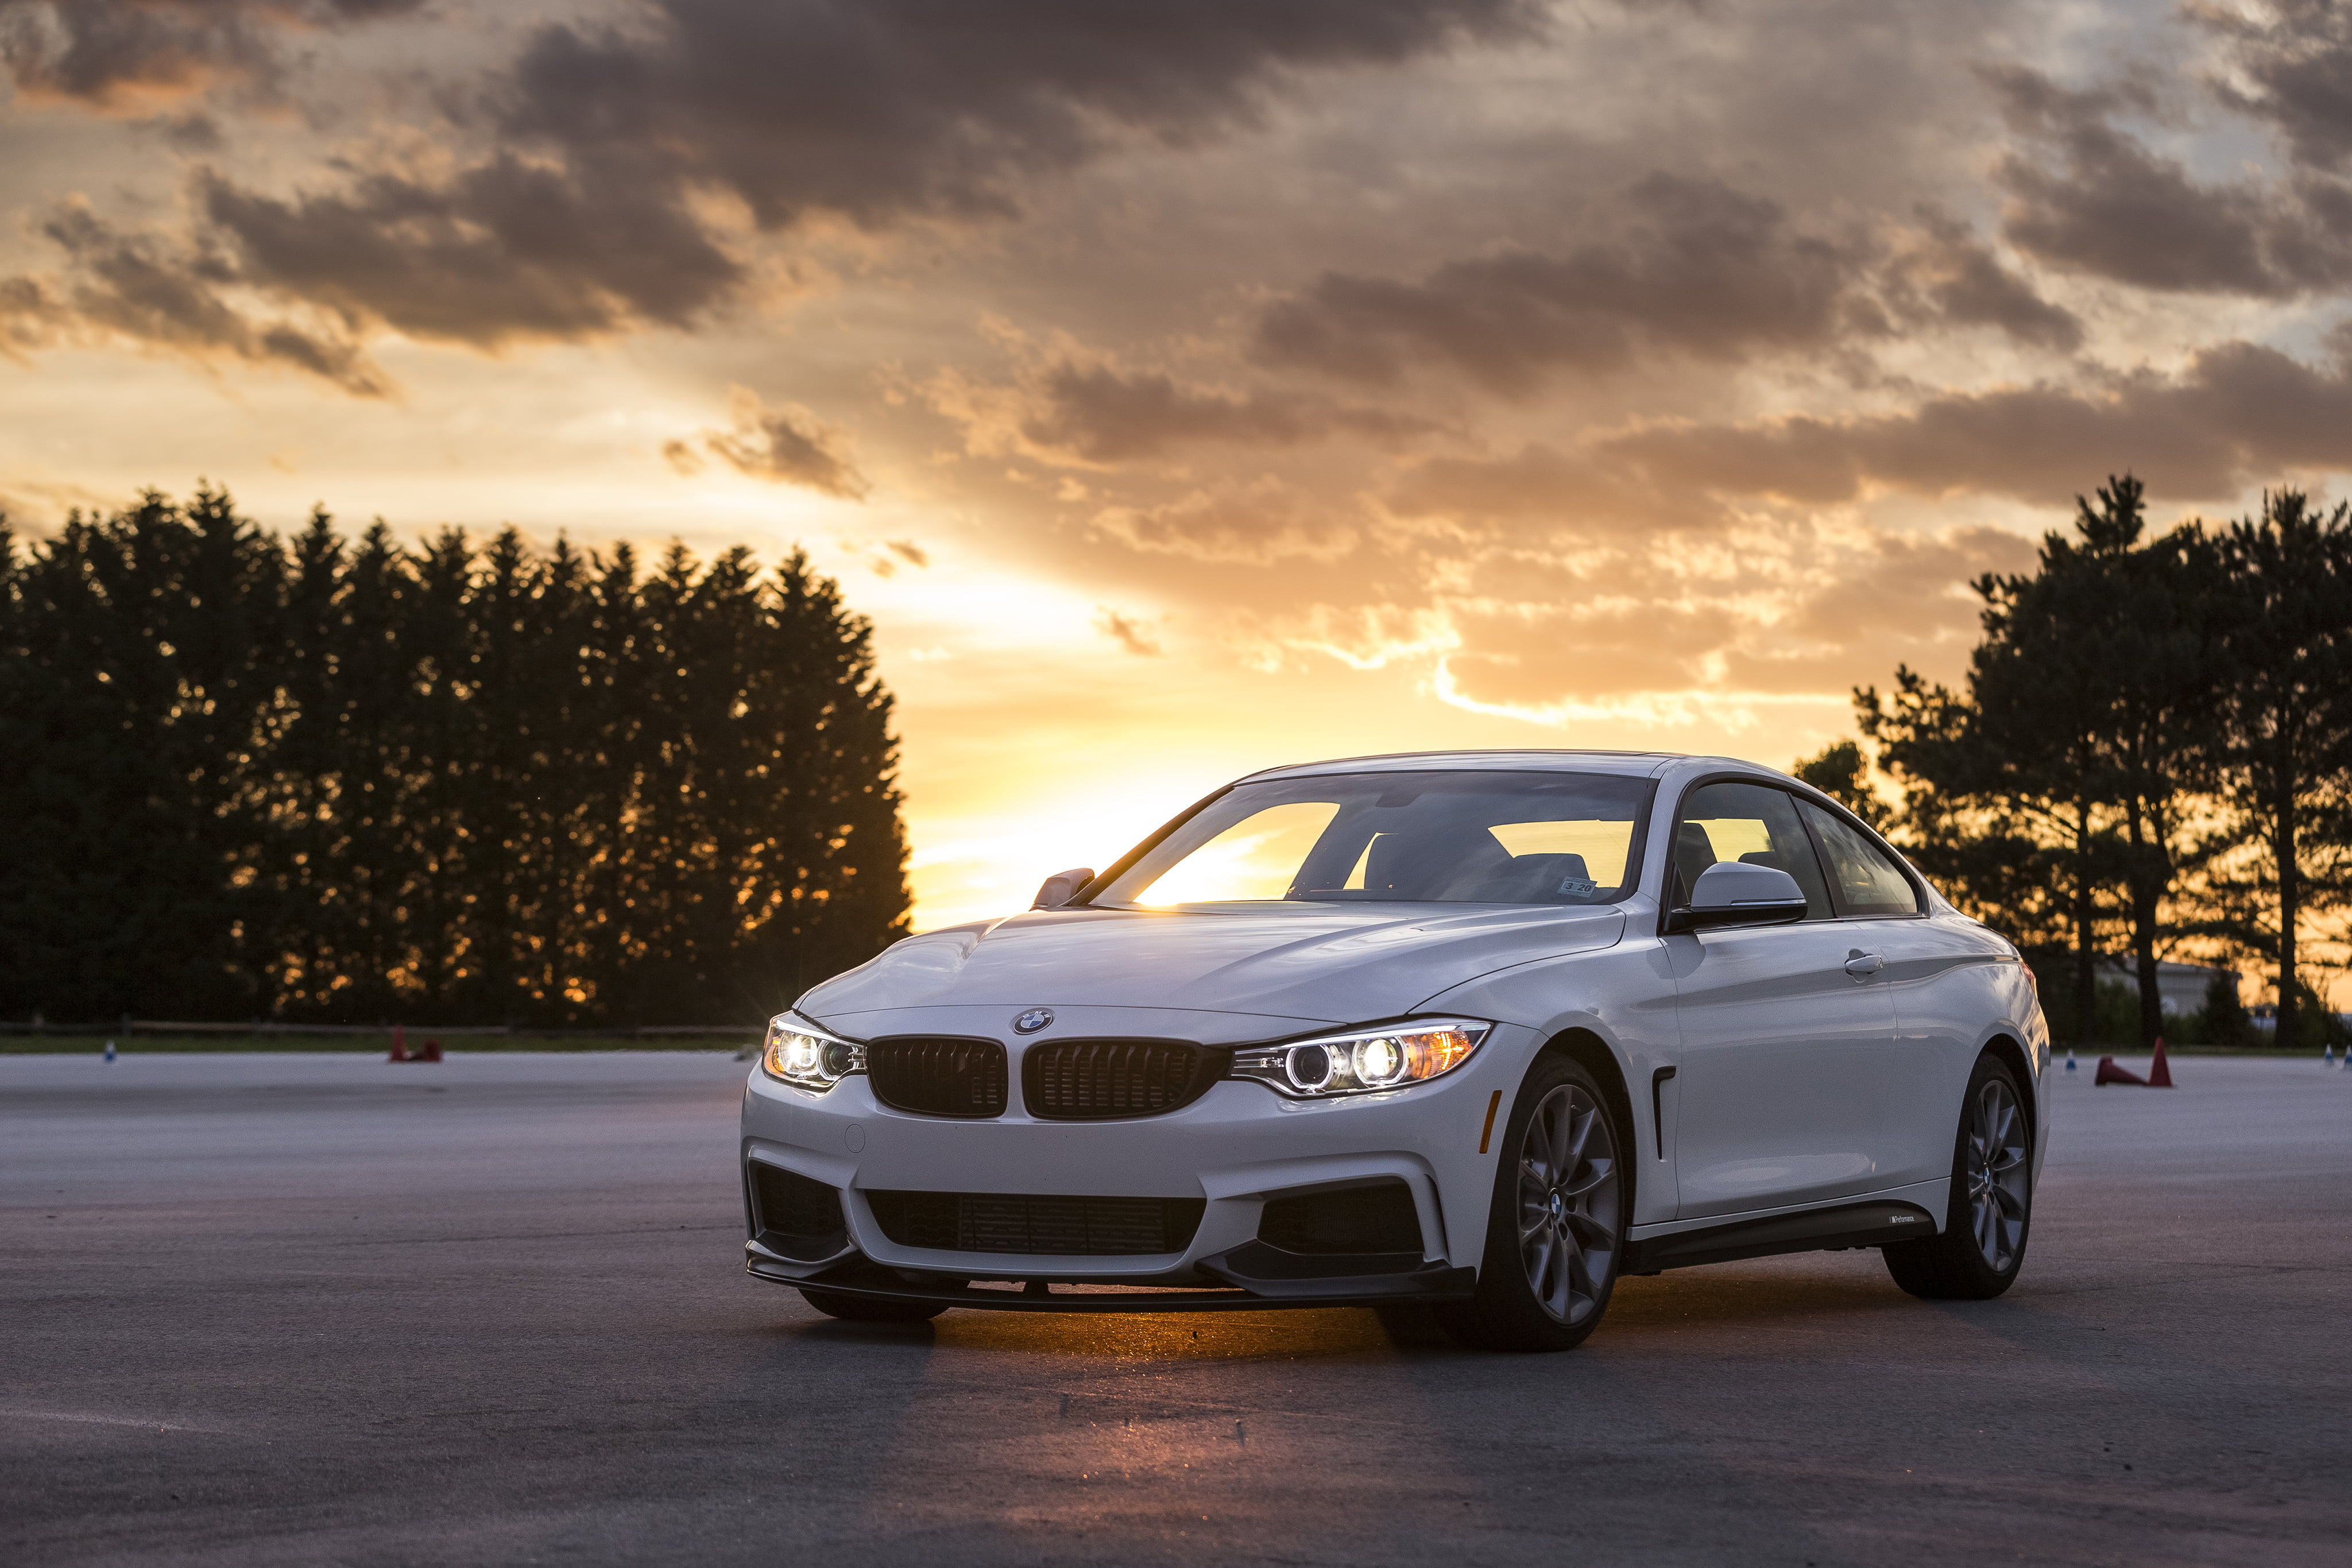 Gray Bmw F30 During Sunset Hd Wallpaper Wallpaper Flare